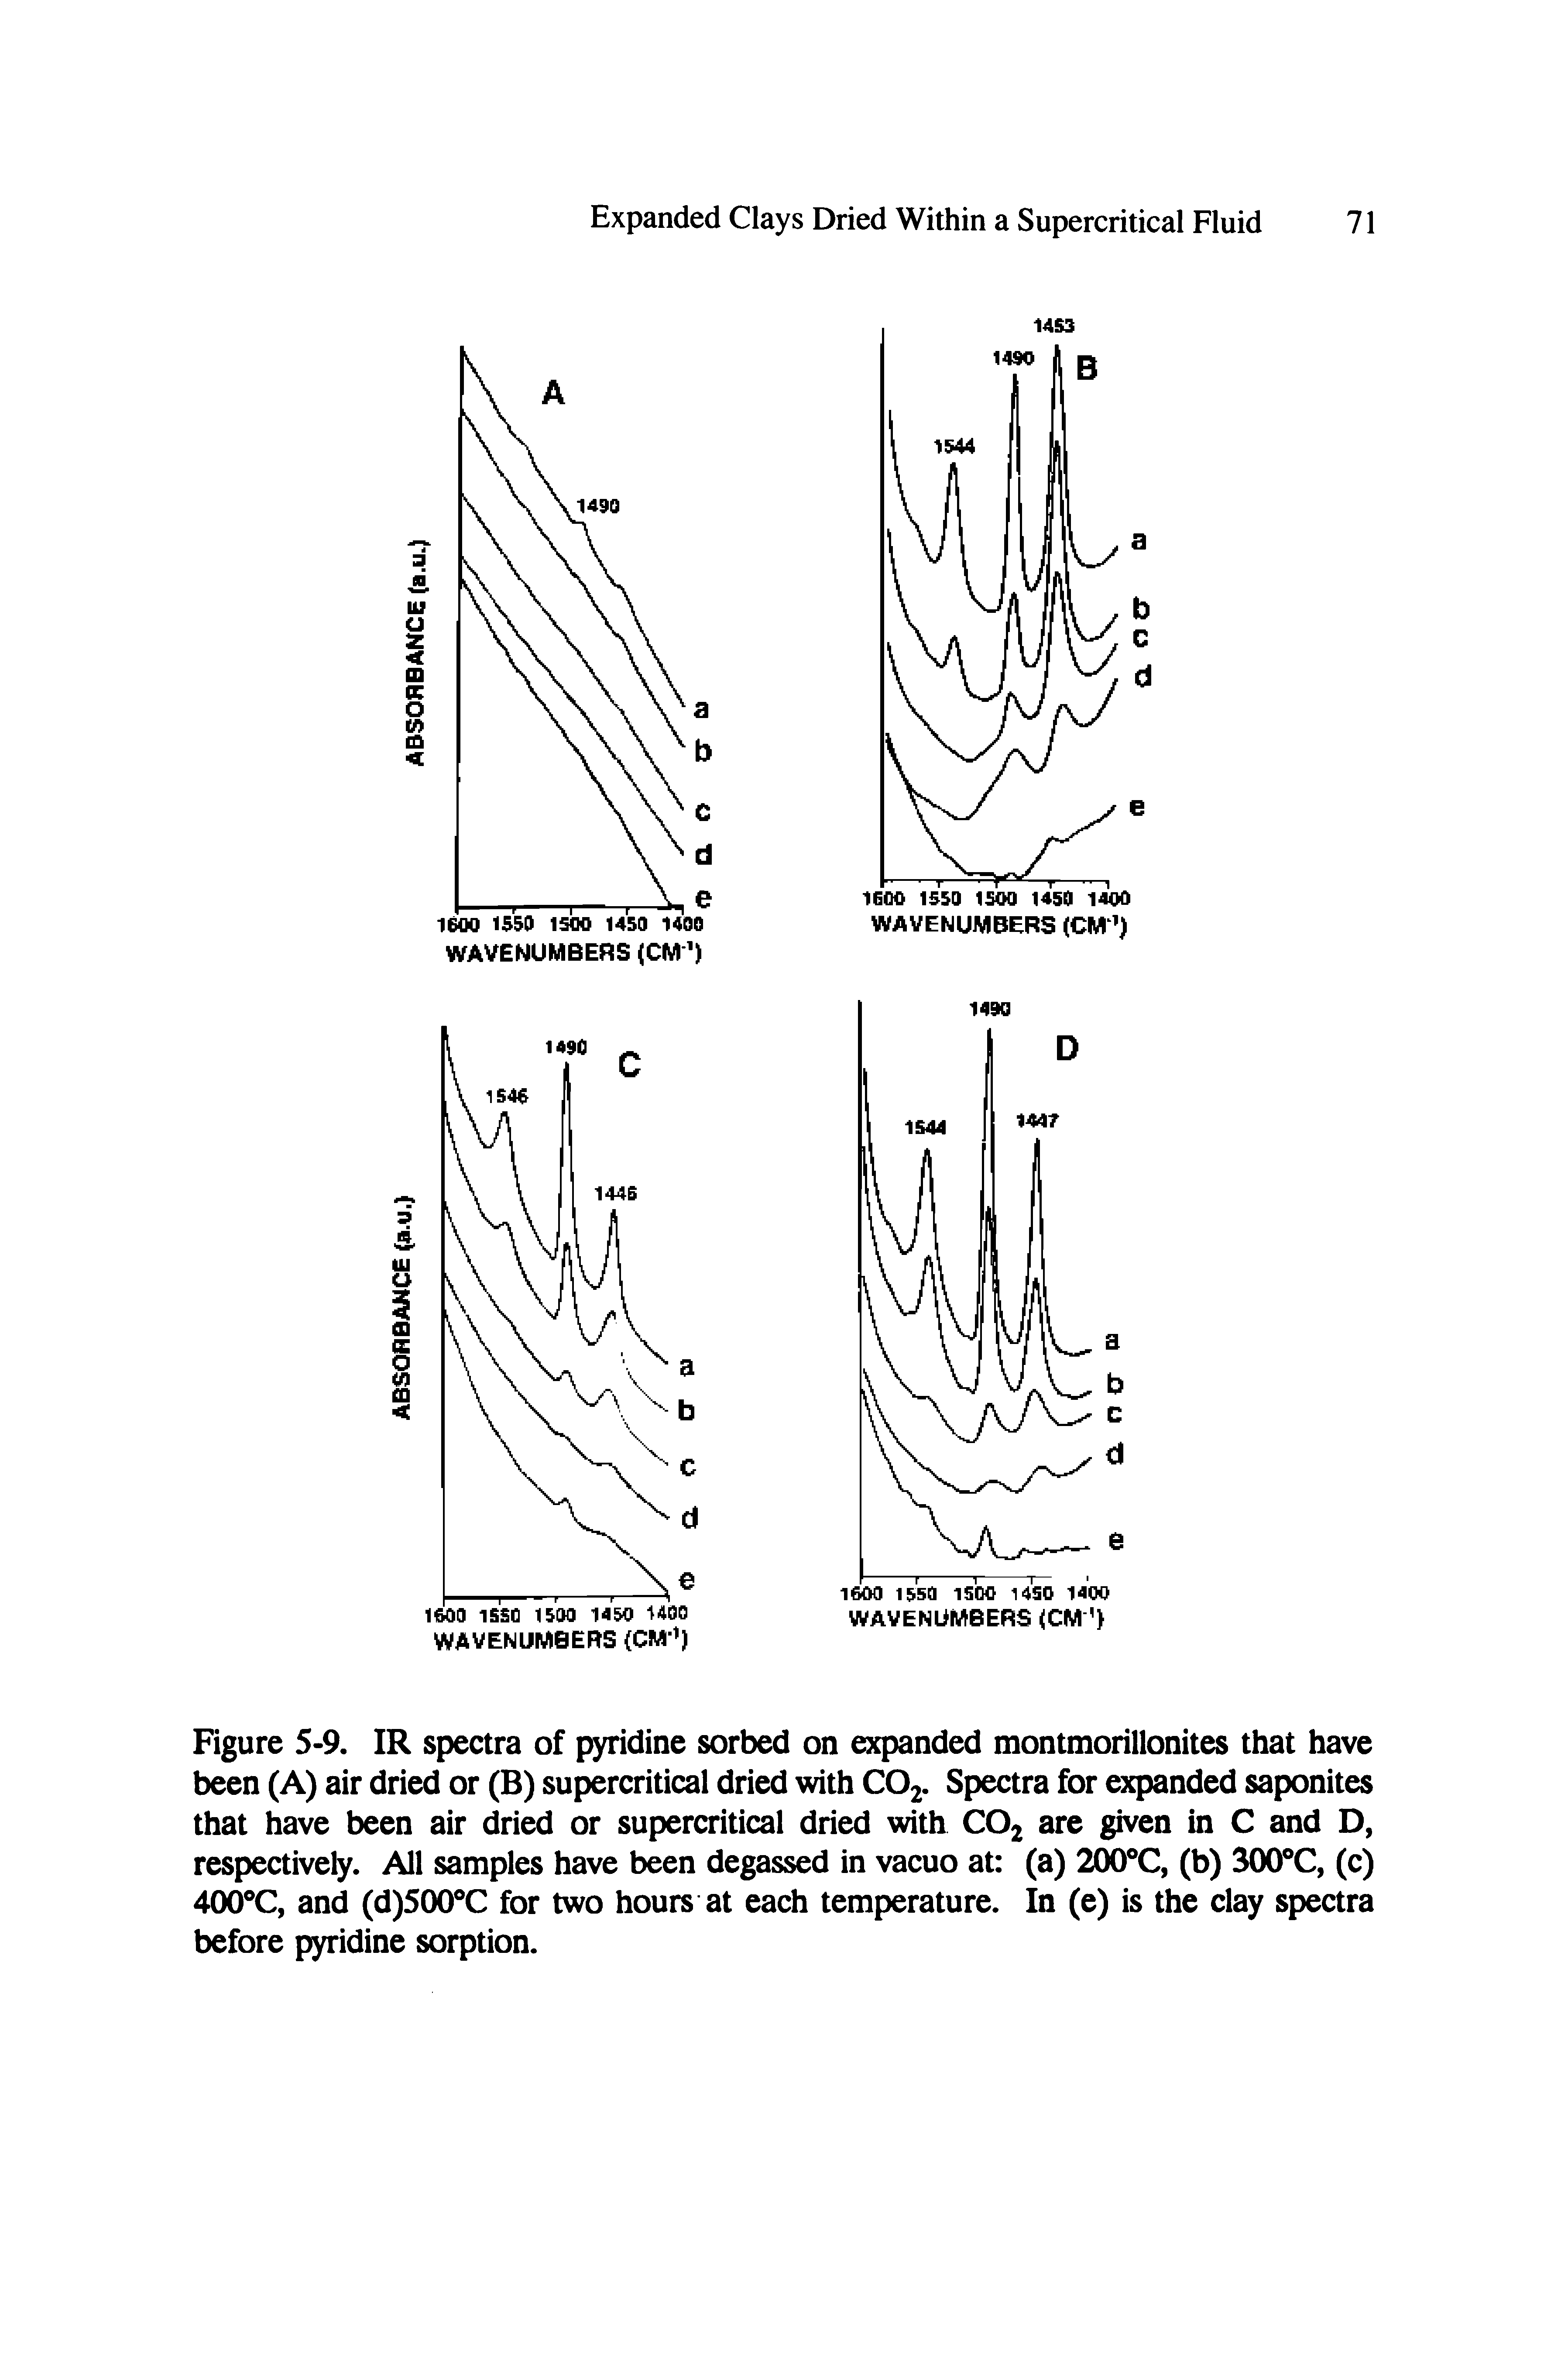 Figure 5-9. IR spectra of pyridine sorbed on expanded montmorillonites that have been (A) air dried or (B) supercritical dried with CO2. Spectra for expanded saponites that have been air dried or supercritical dried with CO2 are given in C and D, respectively. All samples have been degassed in vacuo at (a) 200 C, (b) 300 C, (c) 400 C, and (d)500 C for two hours at each temperature. In (e) is the clay spectra before pyridine sorption.